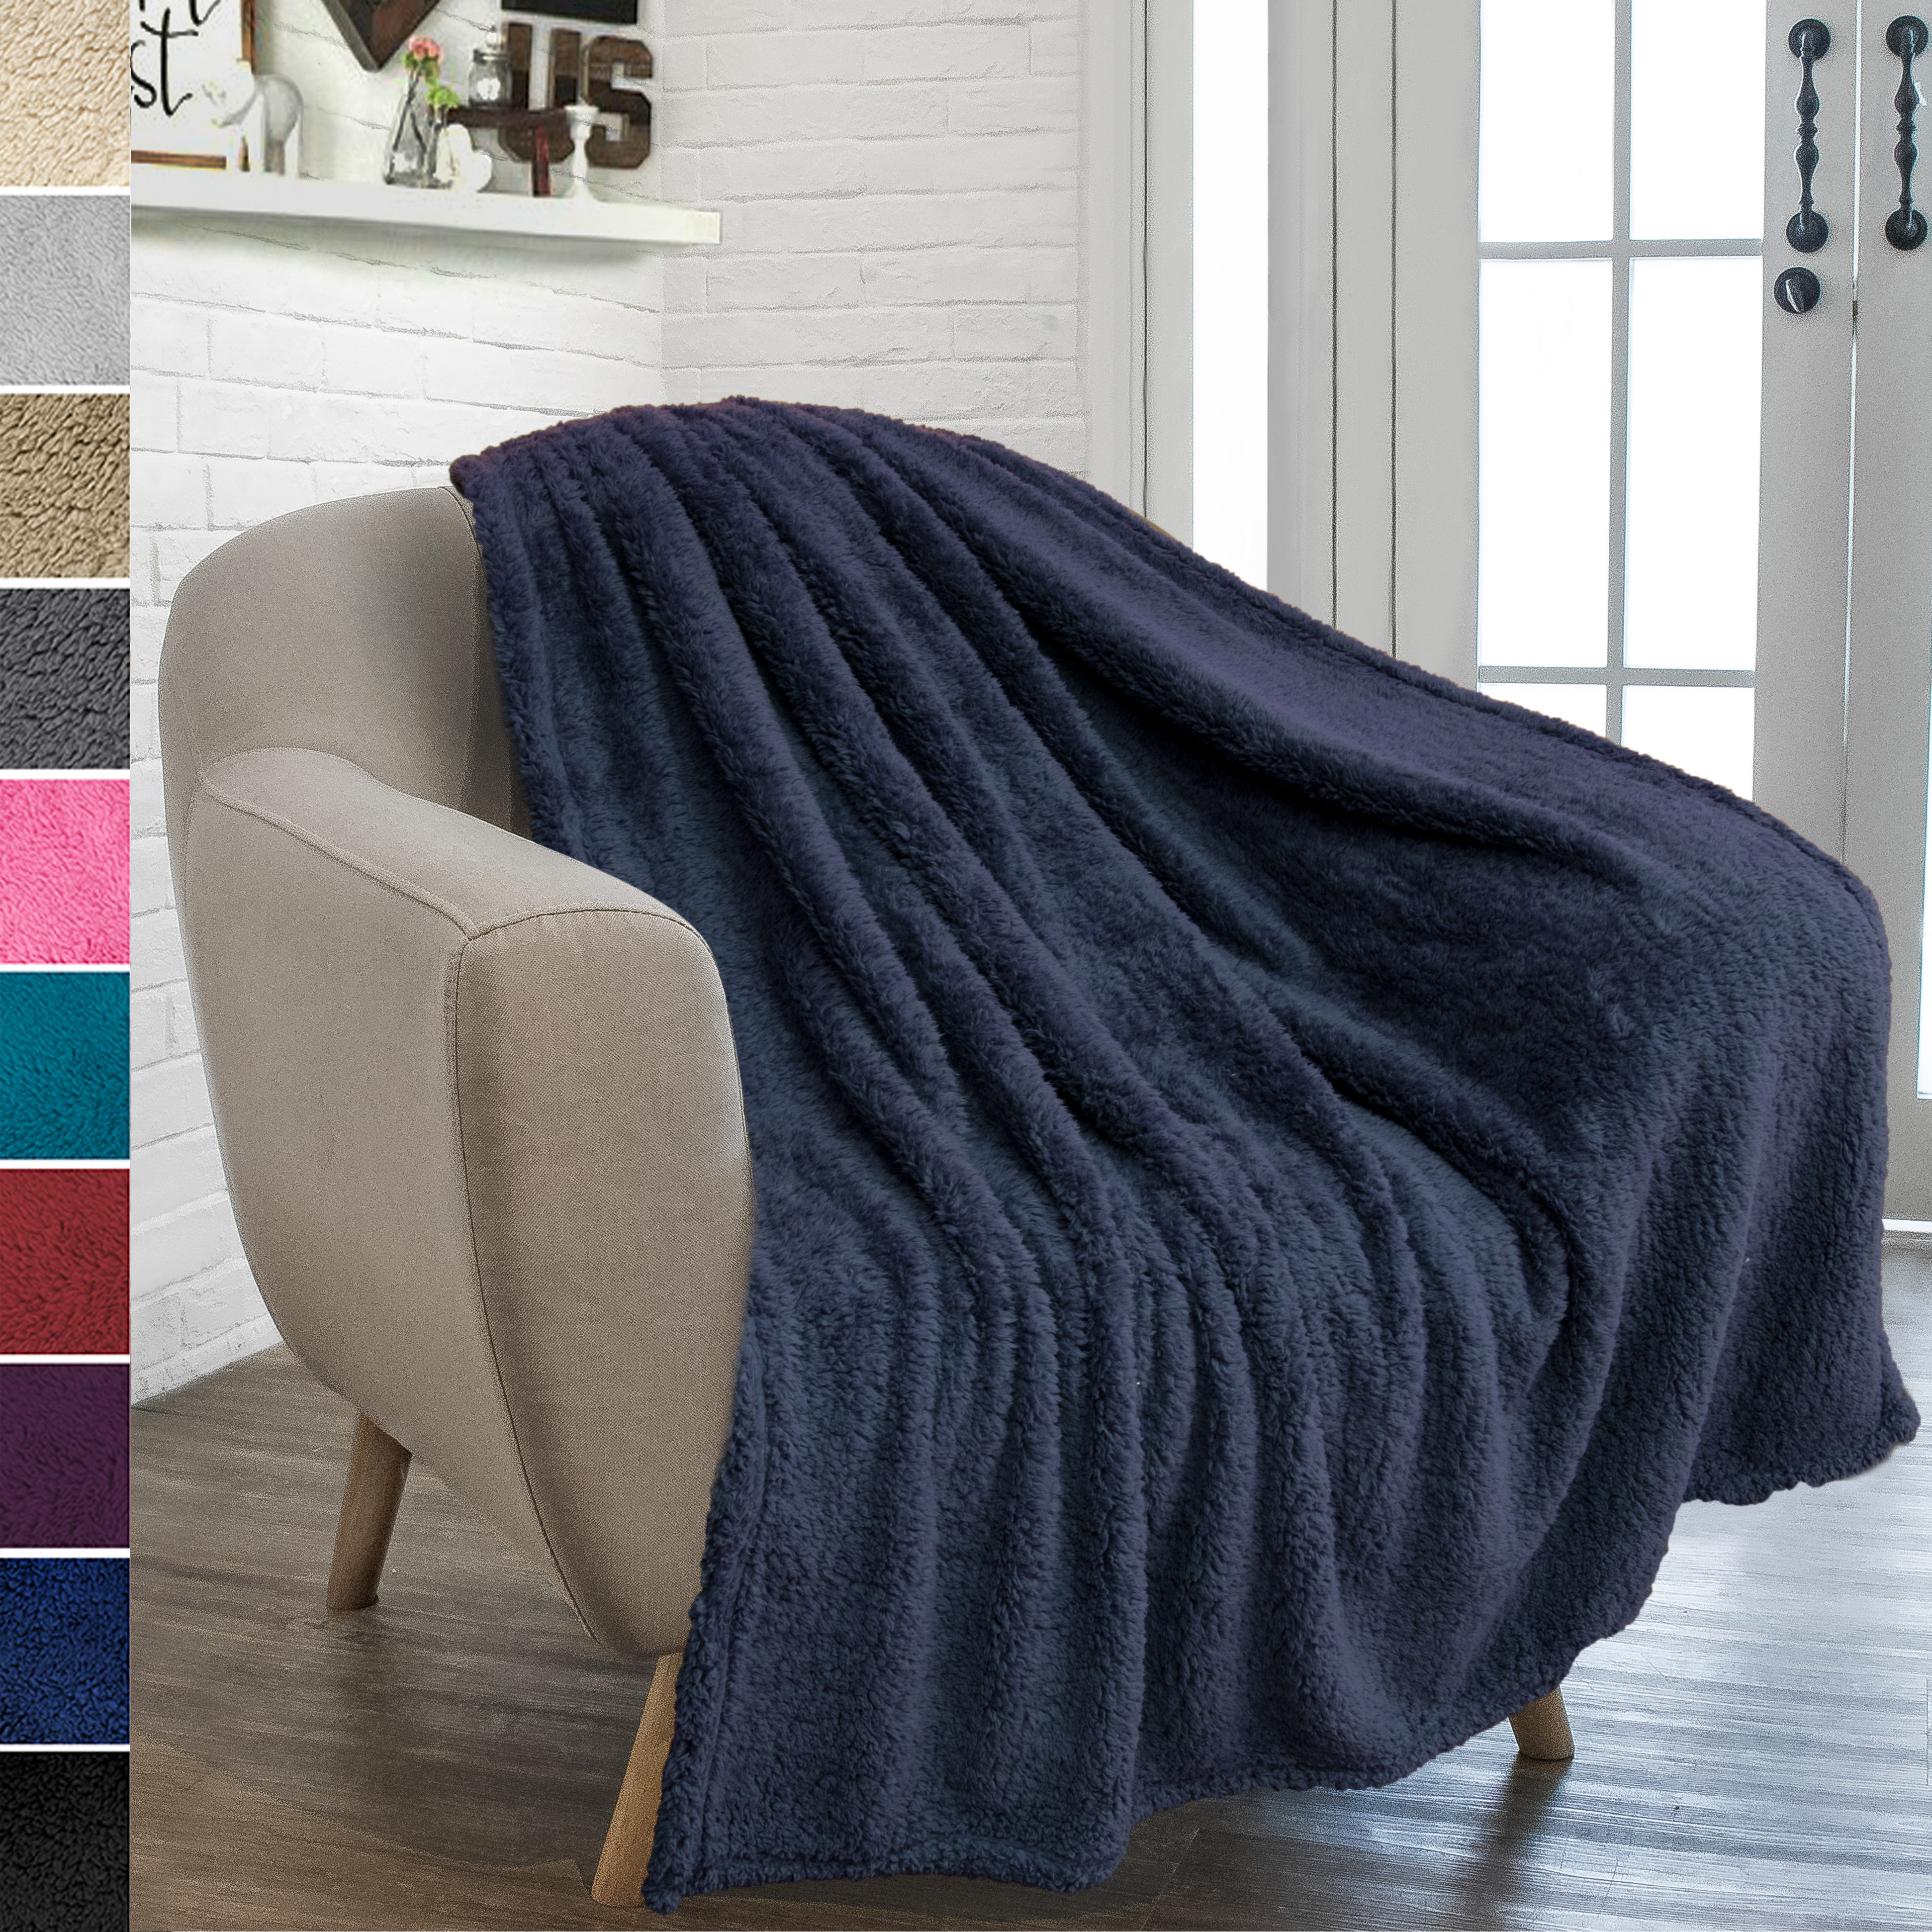 All Season Blankets Throw Size Bed & Living Room Faux Fur Blanket/Sherpa Blanket Comfy and Fuzzy TAFTS Throw Blankets Ivory White Soft Fluffy Fleece Blankets and Throws for Couch 